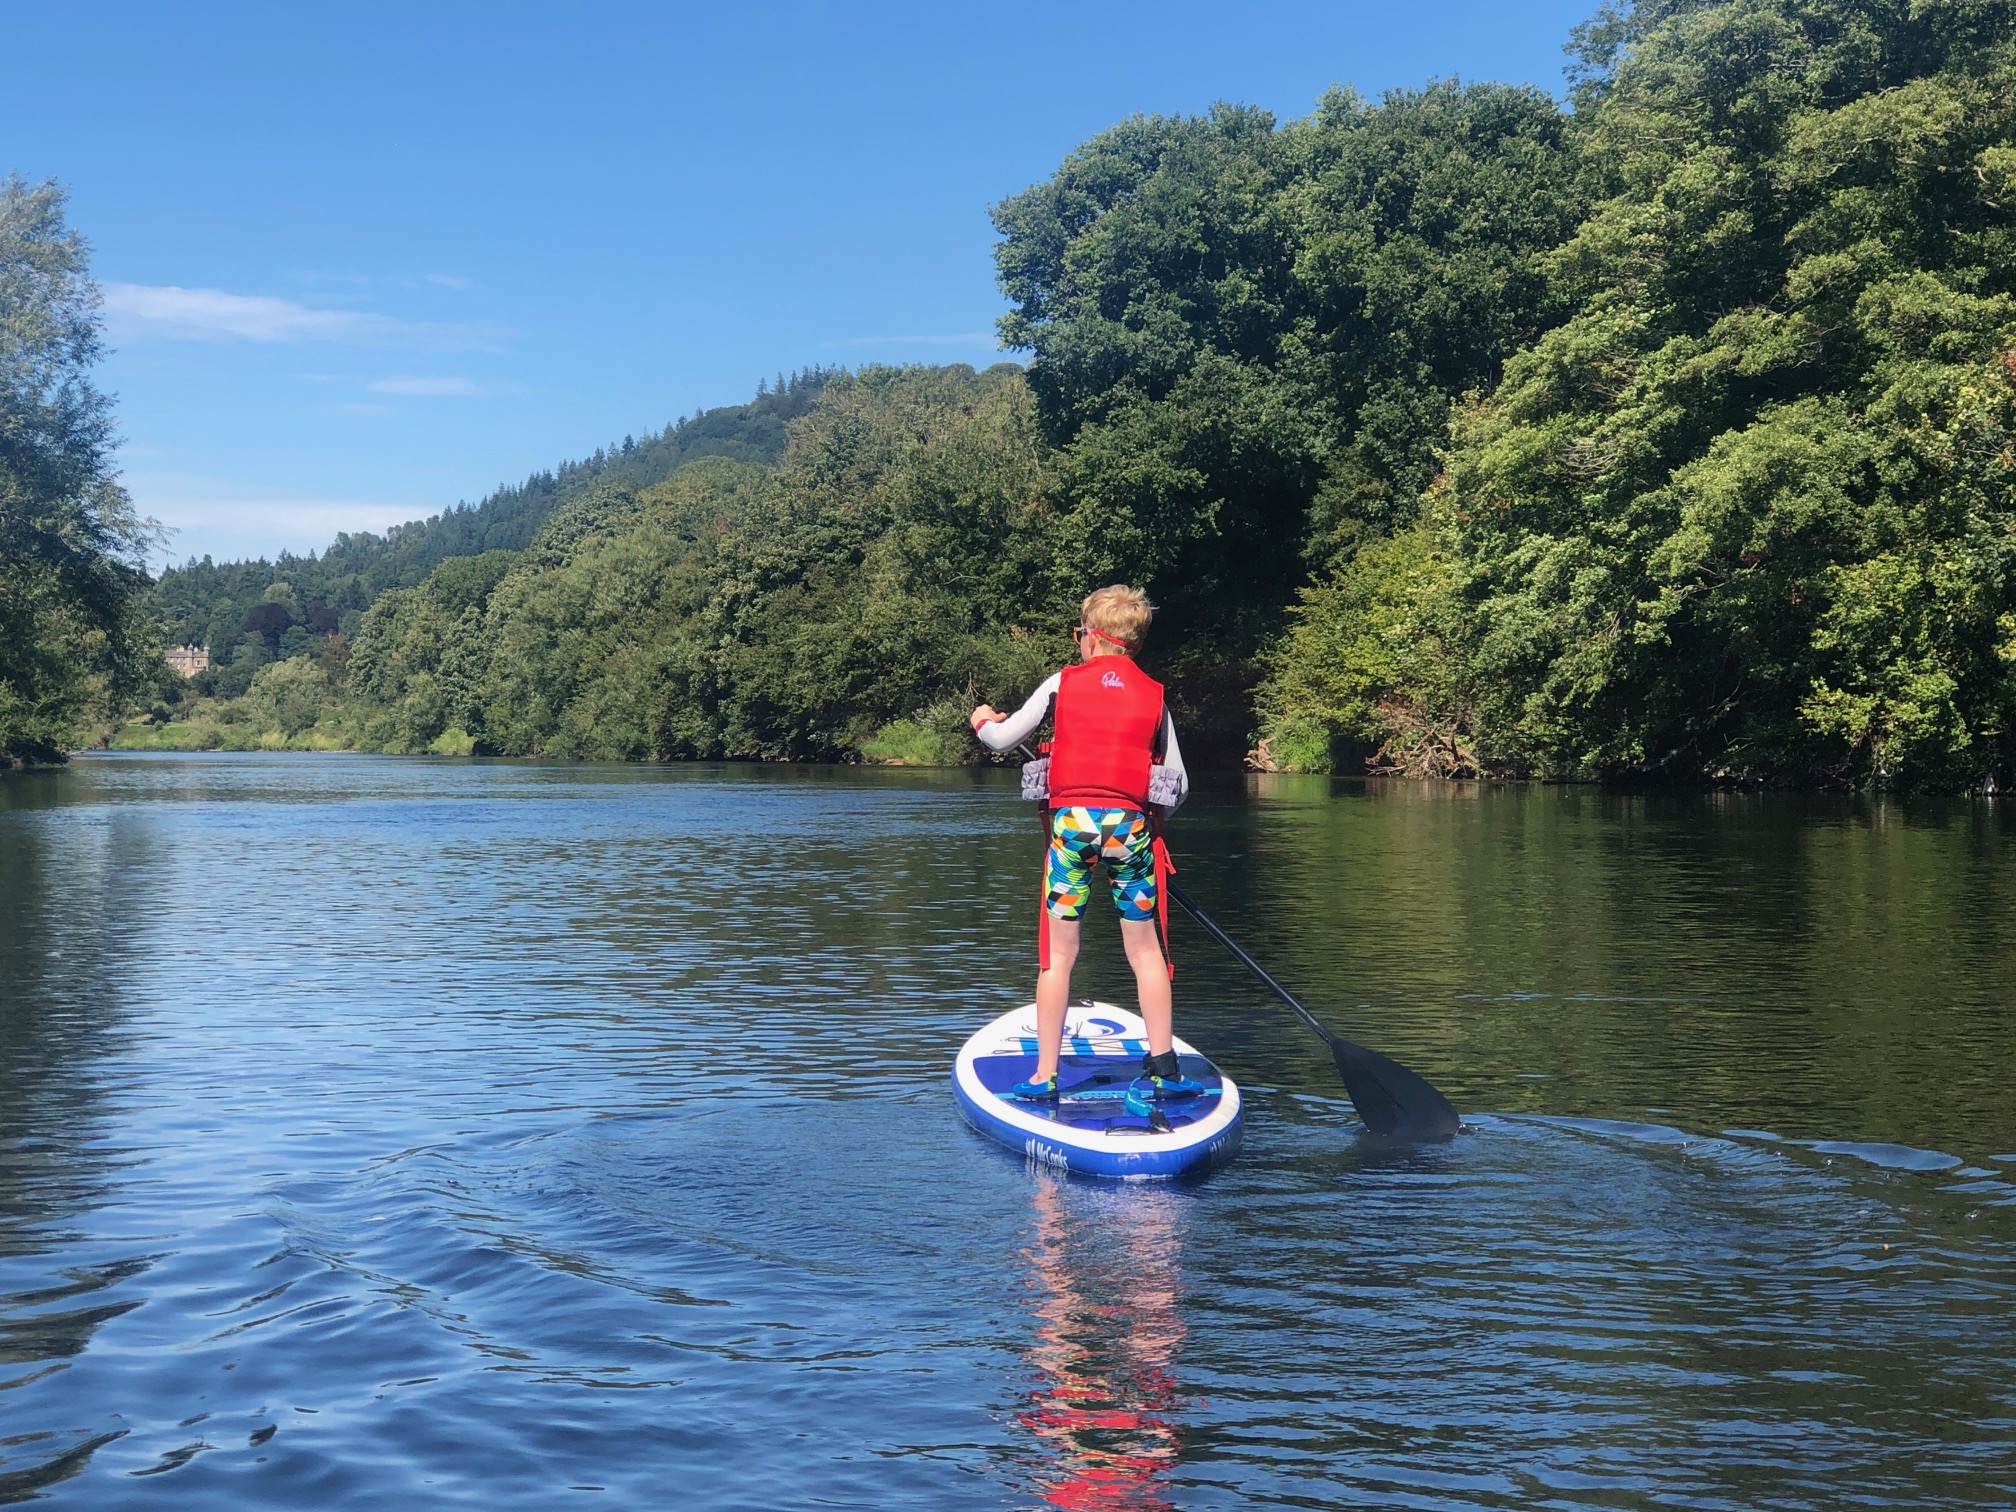 Family fun on The River Wye Stand-up paddle boarding (SUP) with Inspire2Adventure